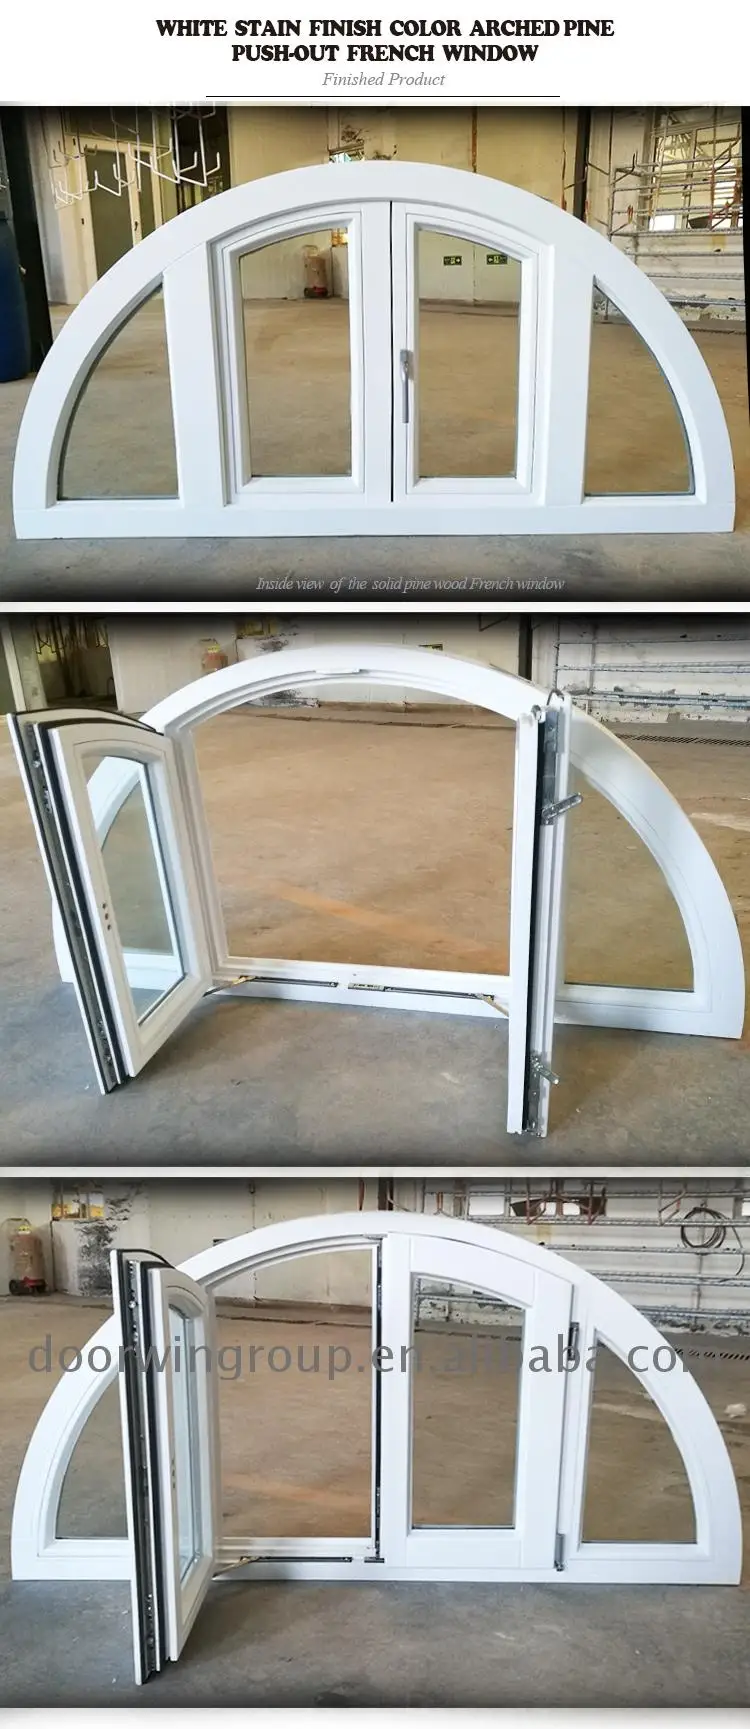 Factory outlet round double glazed windows for sale bay window replacing crank on casement